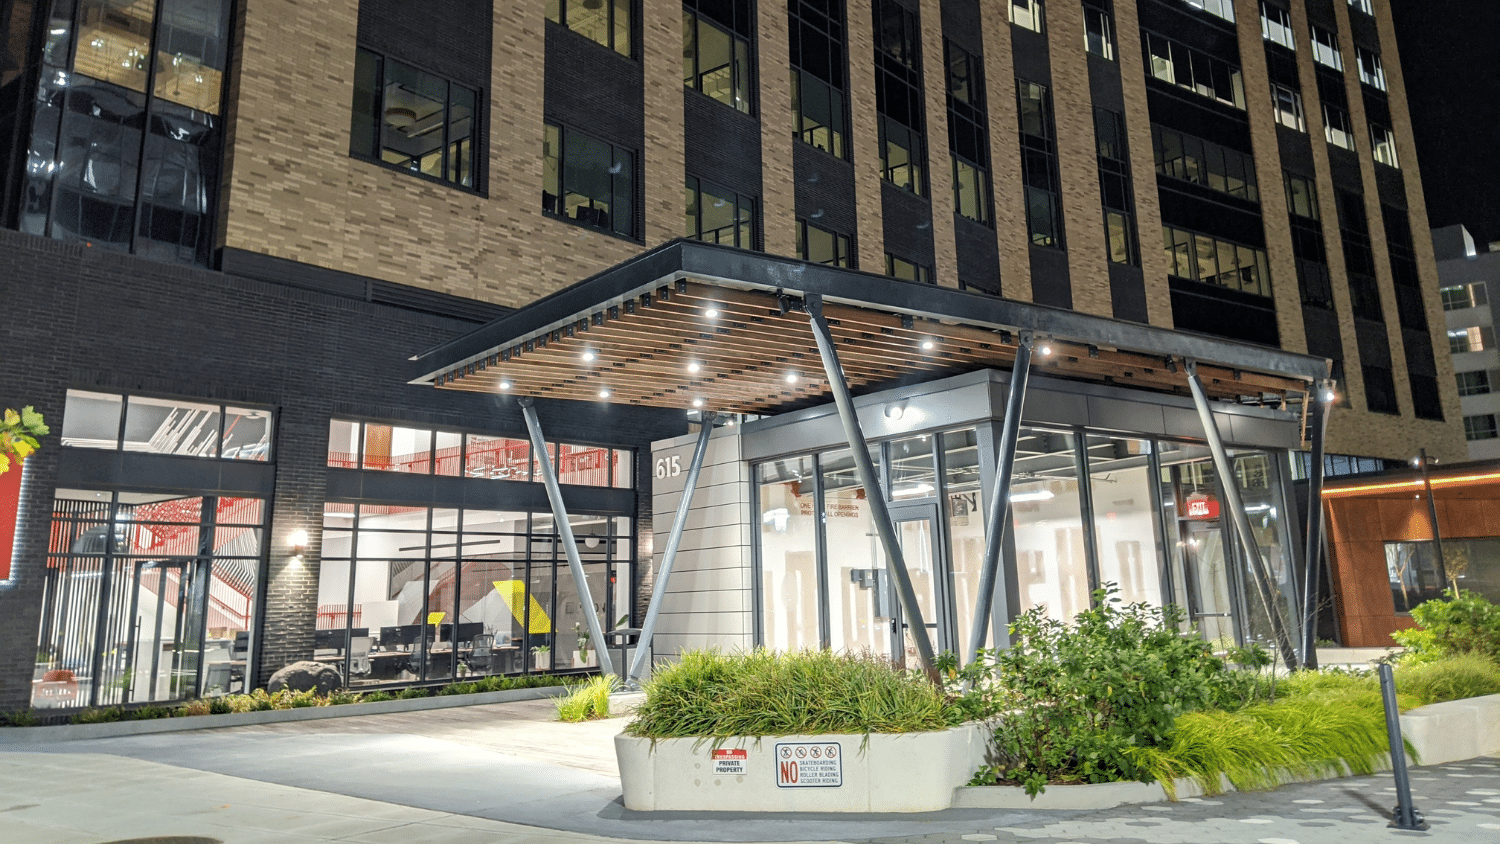 321 coffee's storefront in downtown with store lights lit up at night